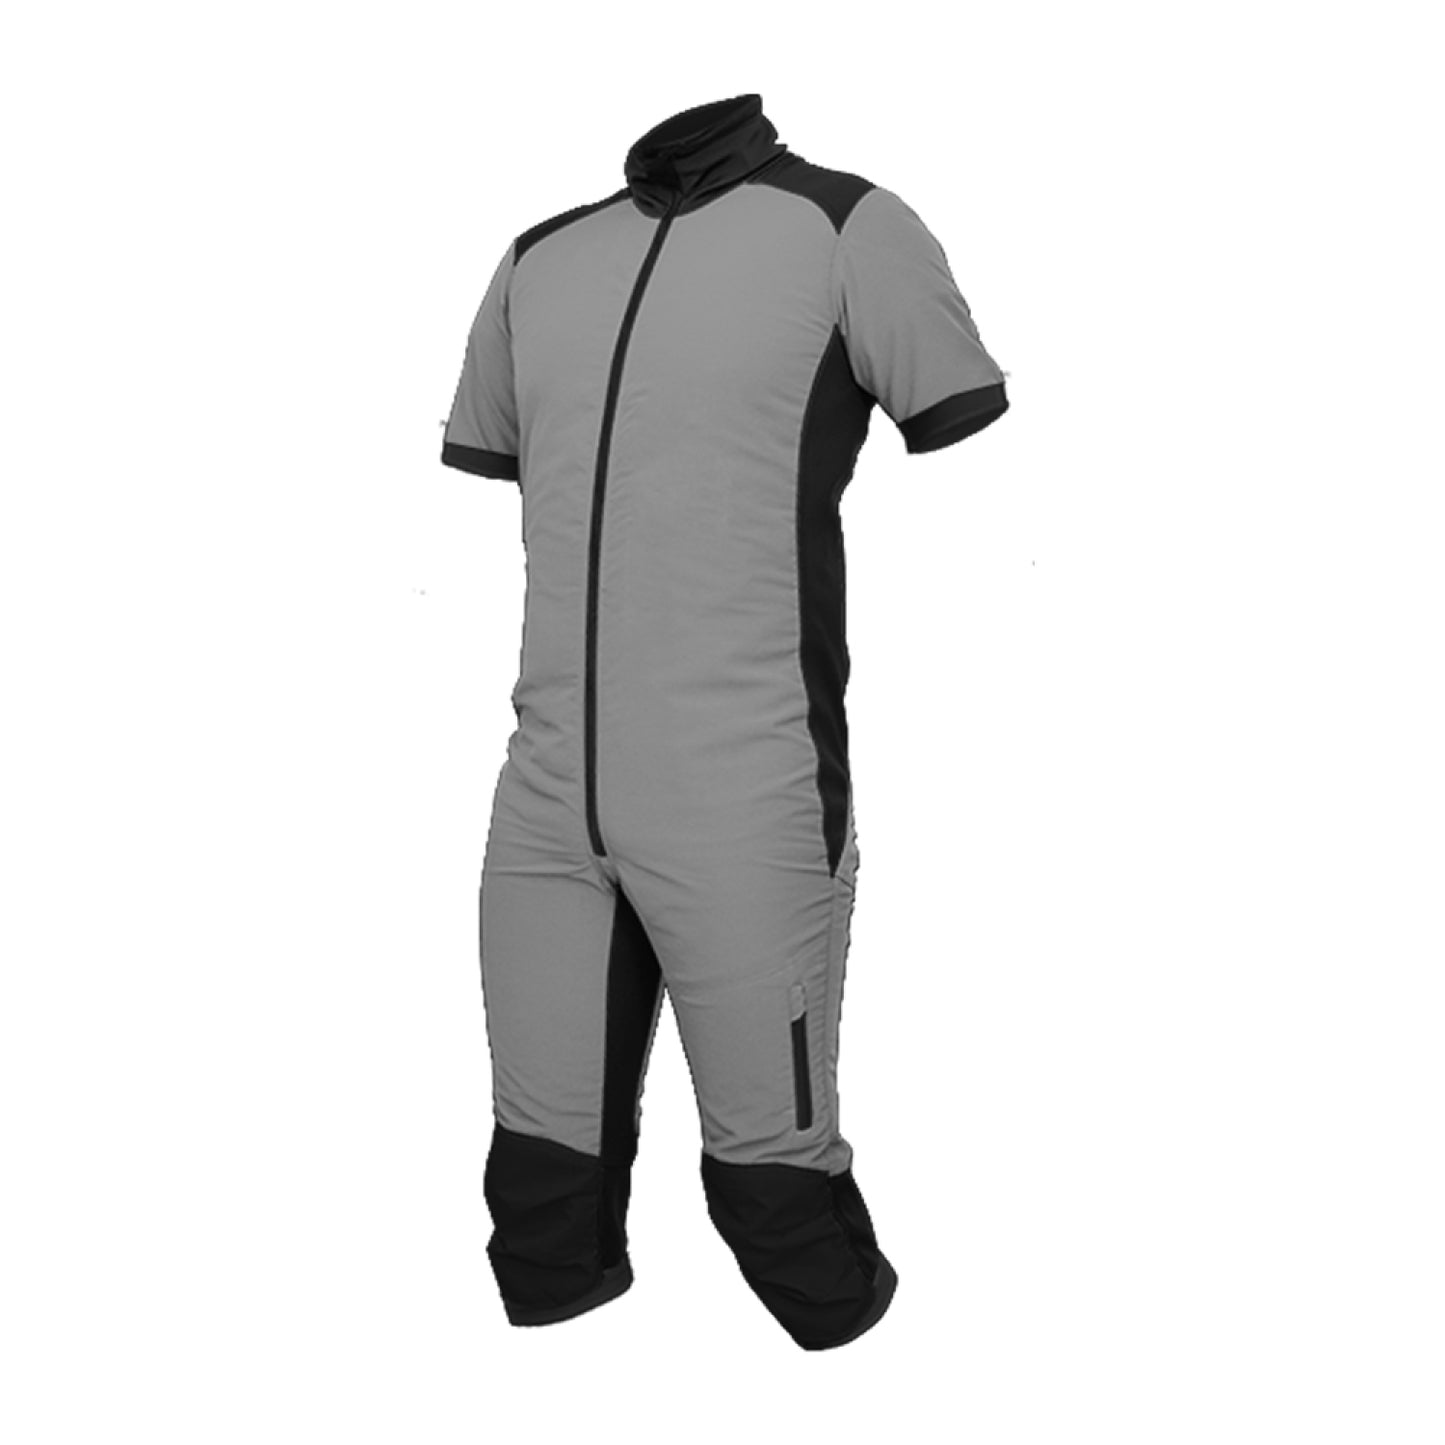 Skydiving Freefly Summer Suit S2-02